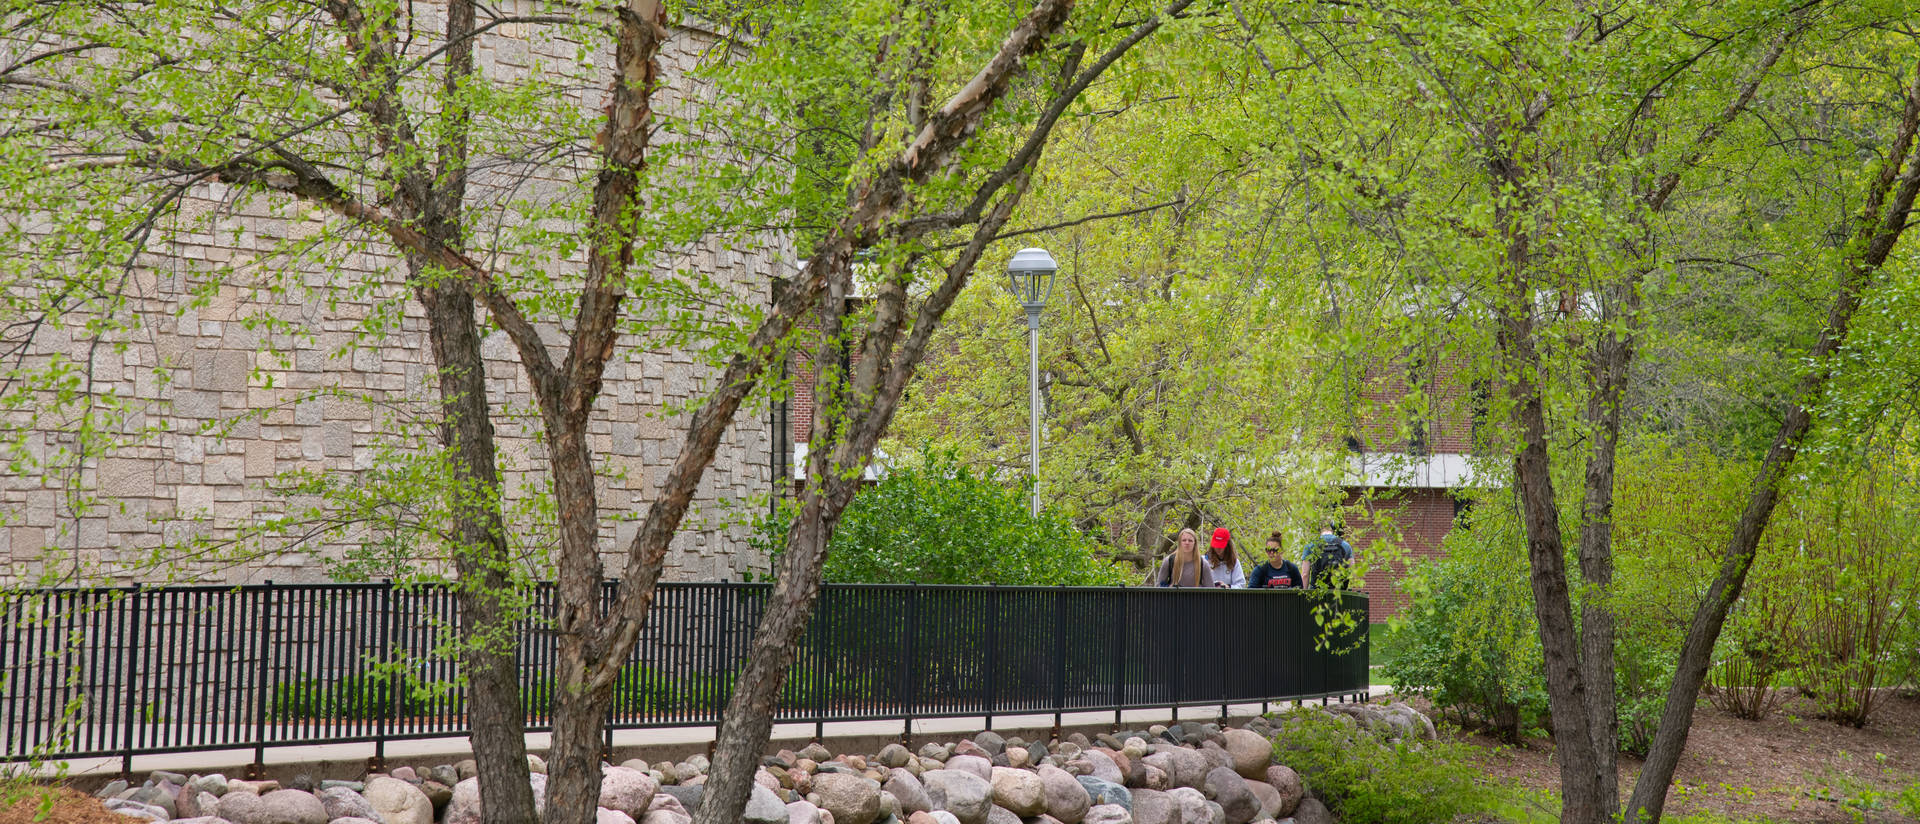 Students walking amidst campus greenery